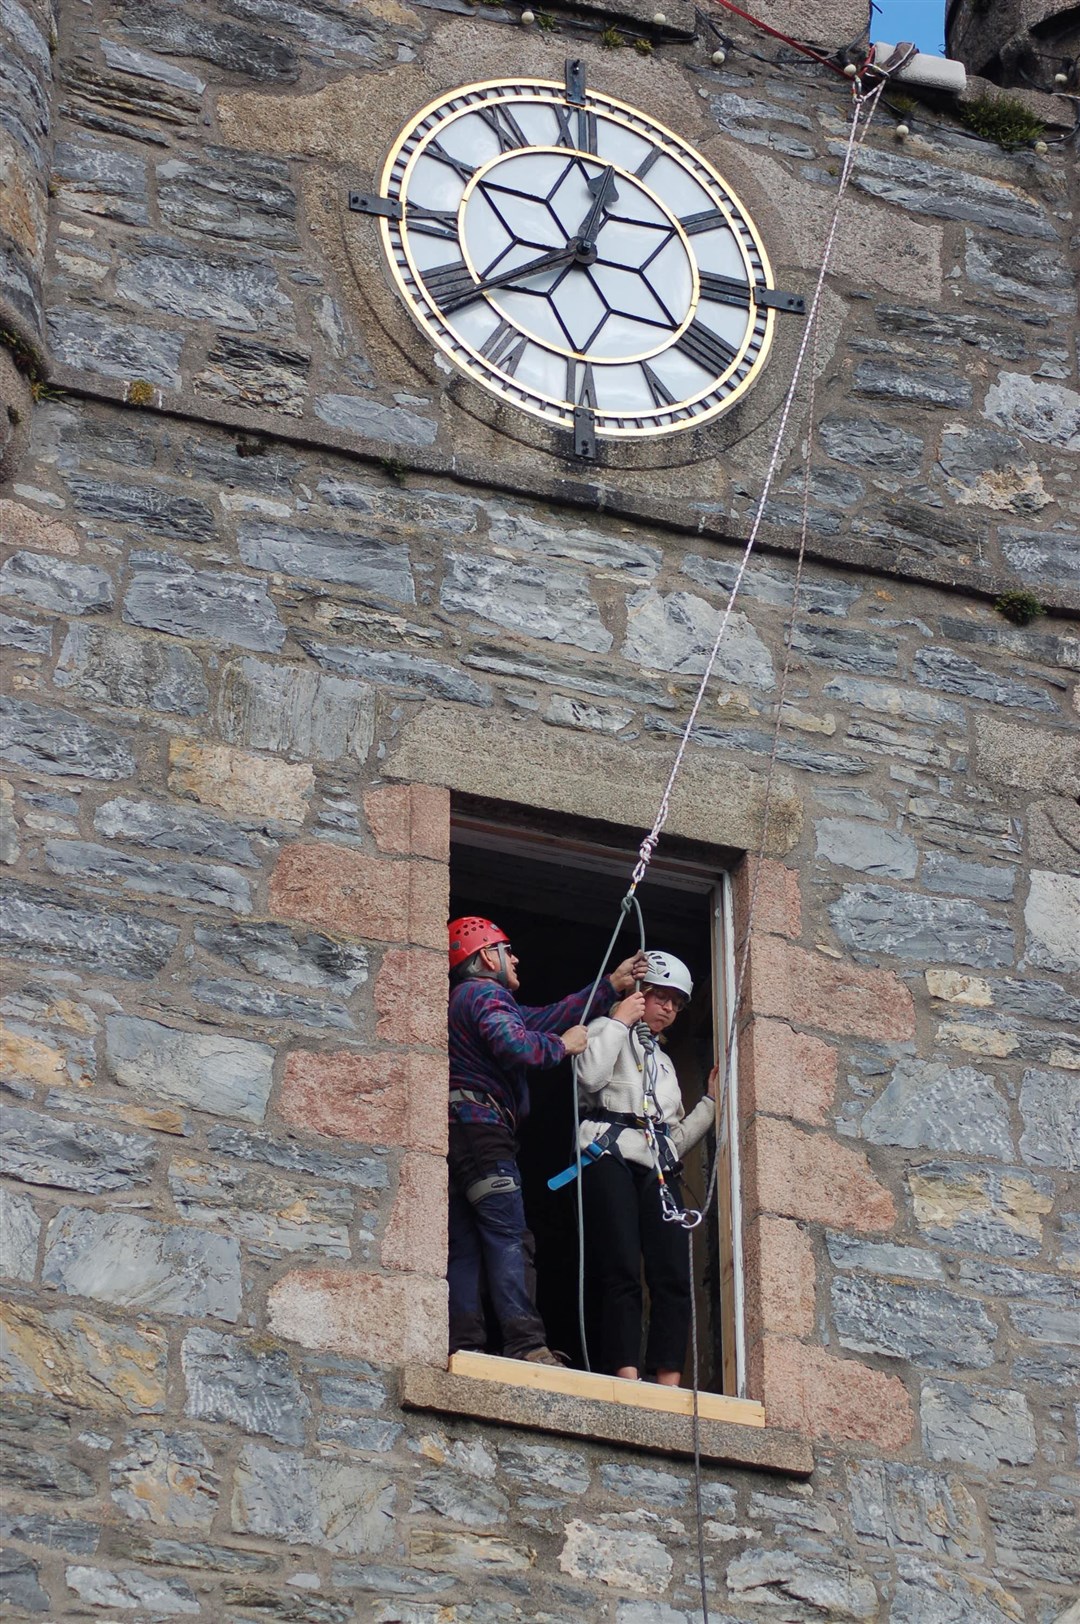 Viktoria Eriksson getting ready to take part in the abseil.